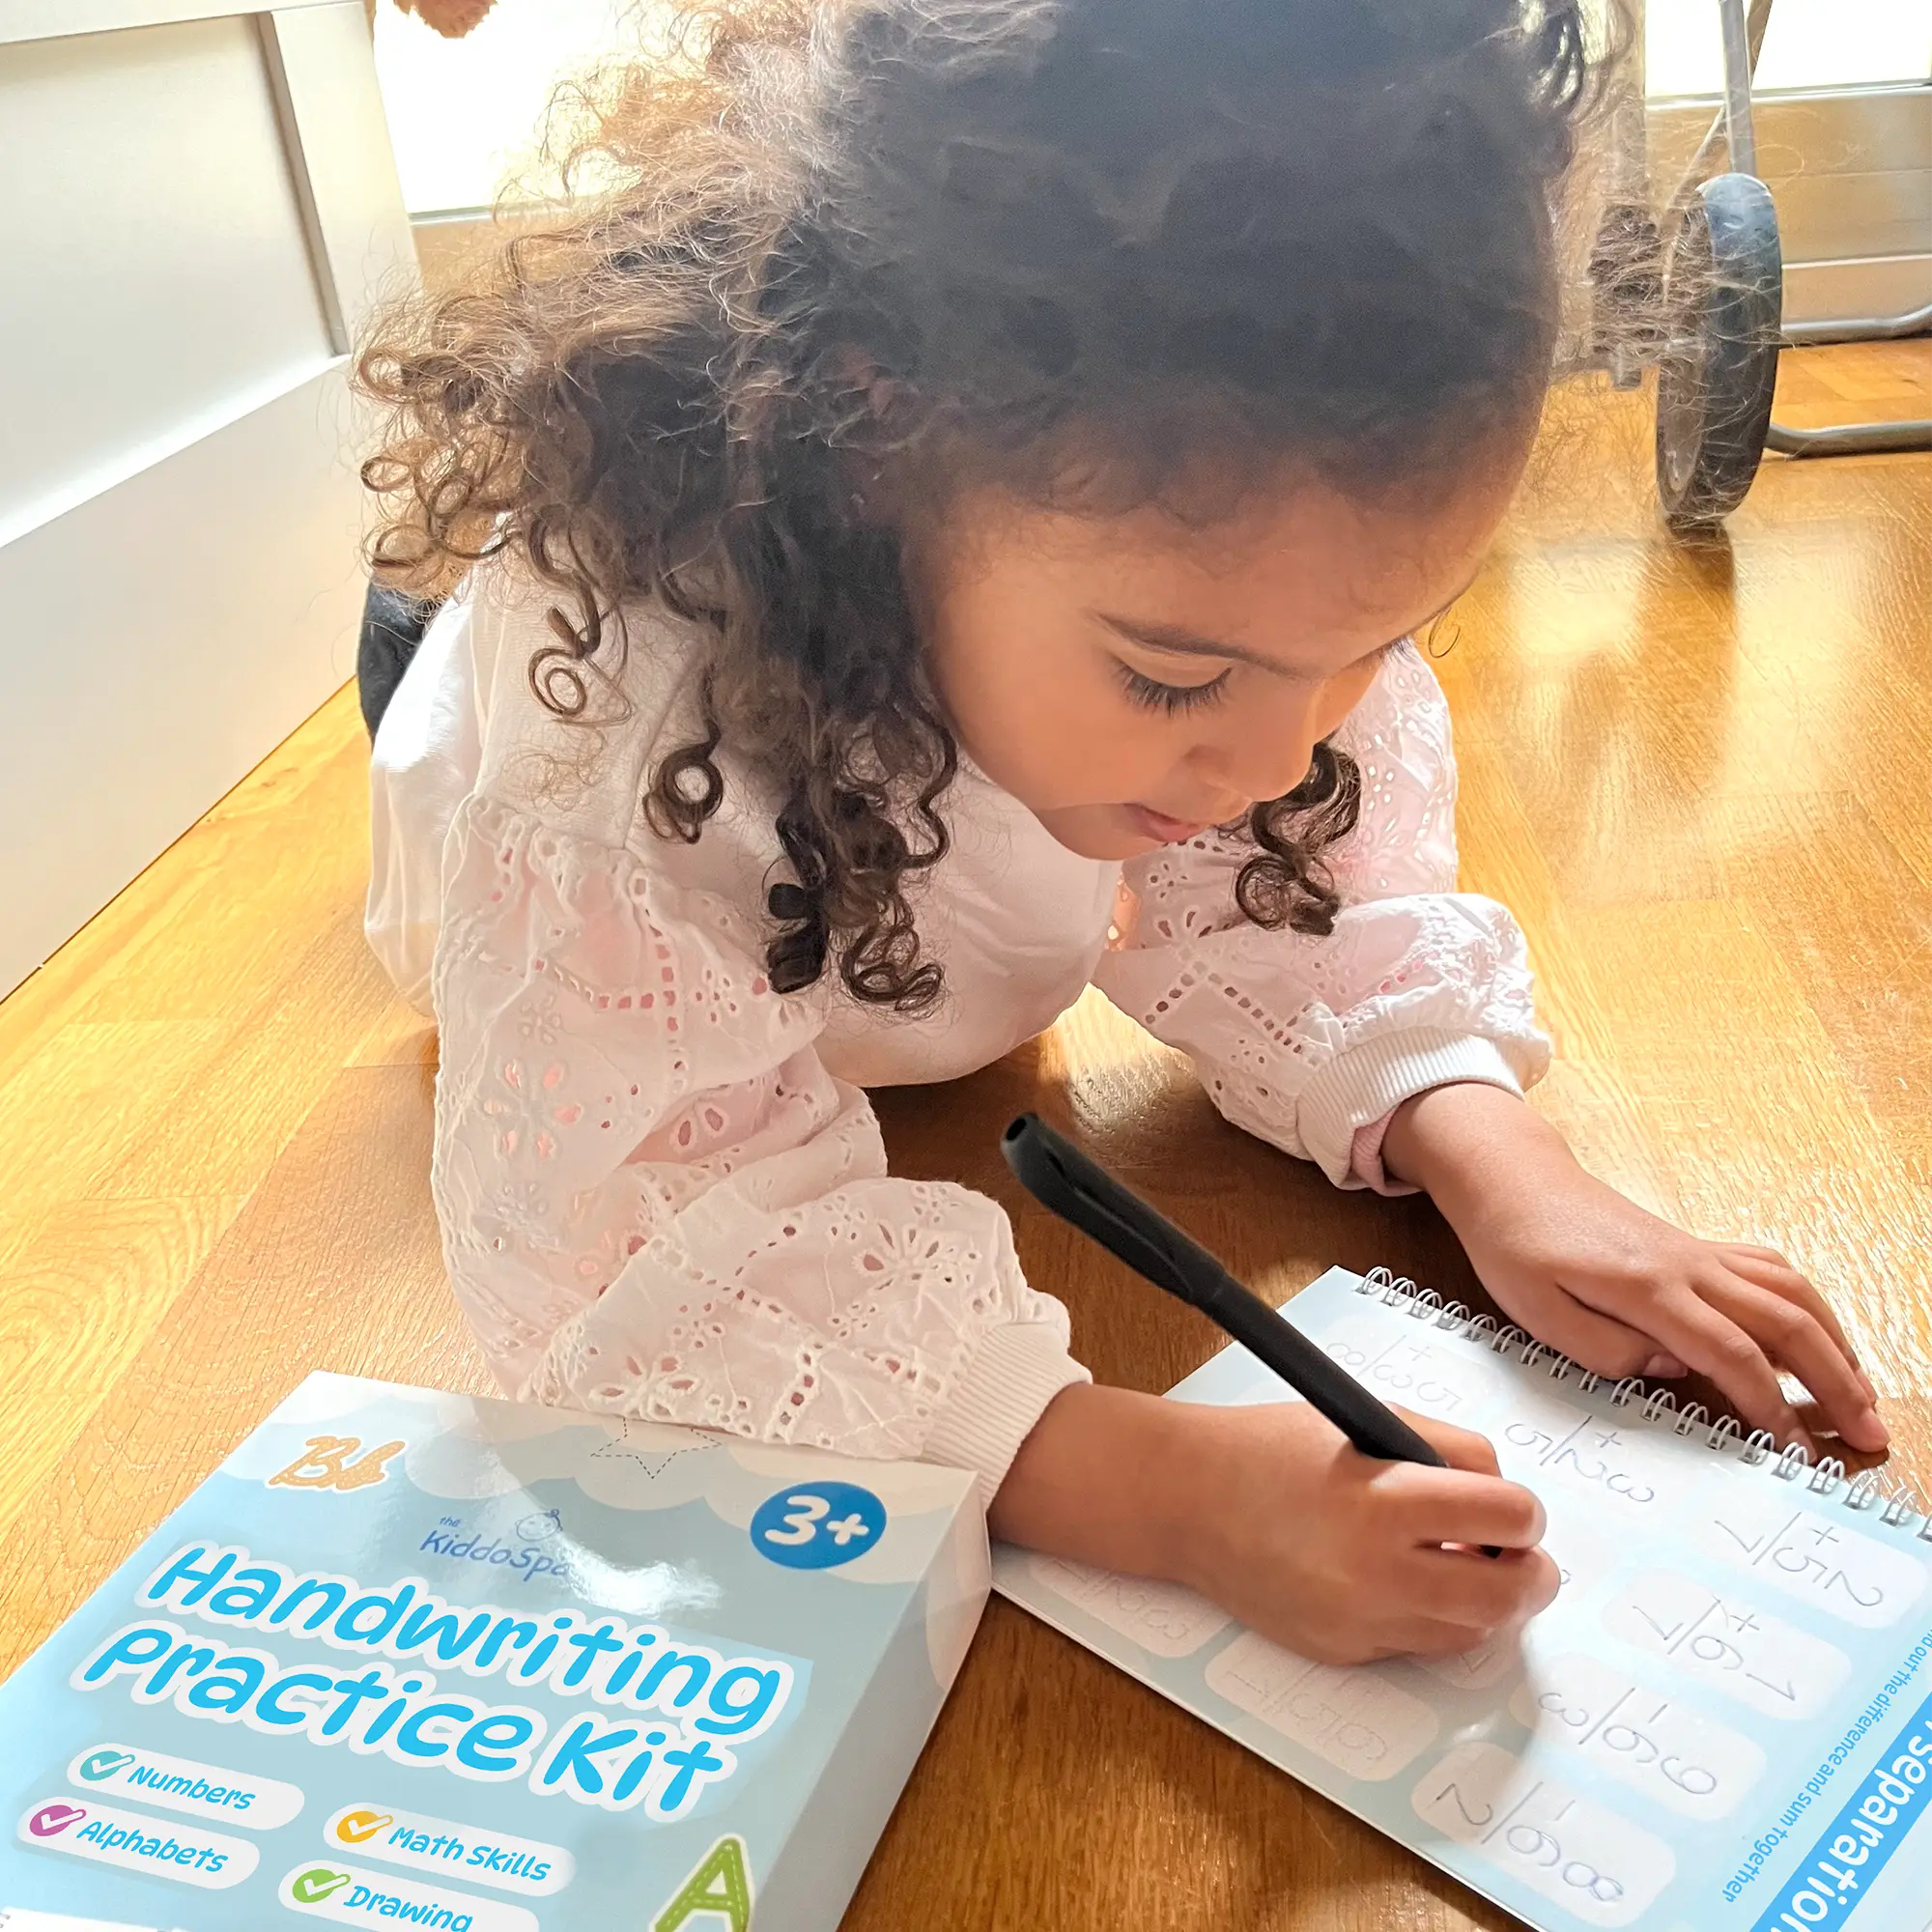 KiddoSpace’s Handwriting Practice Kit (4 A5 Books + 1 Pen Grip + 1 Special Ink Pen)